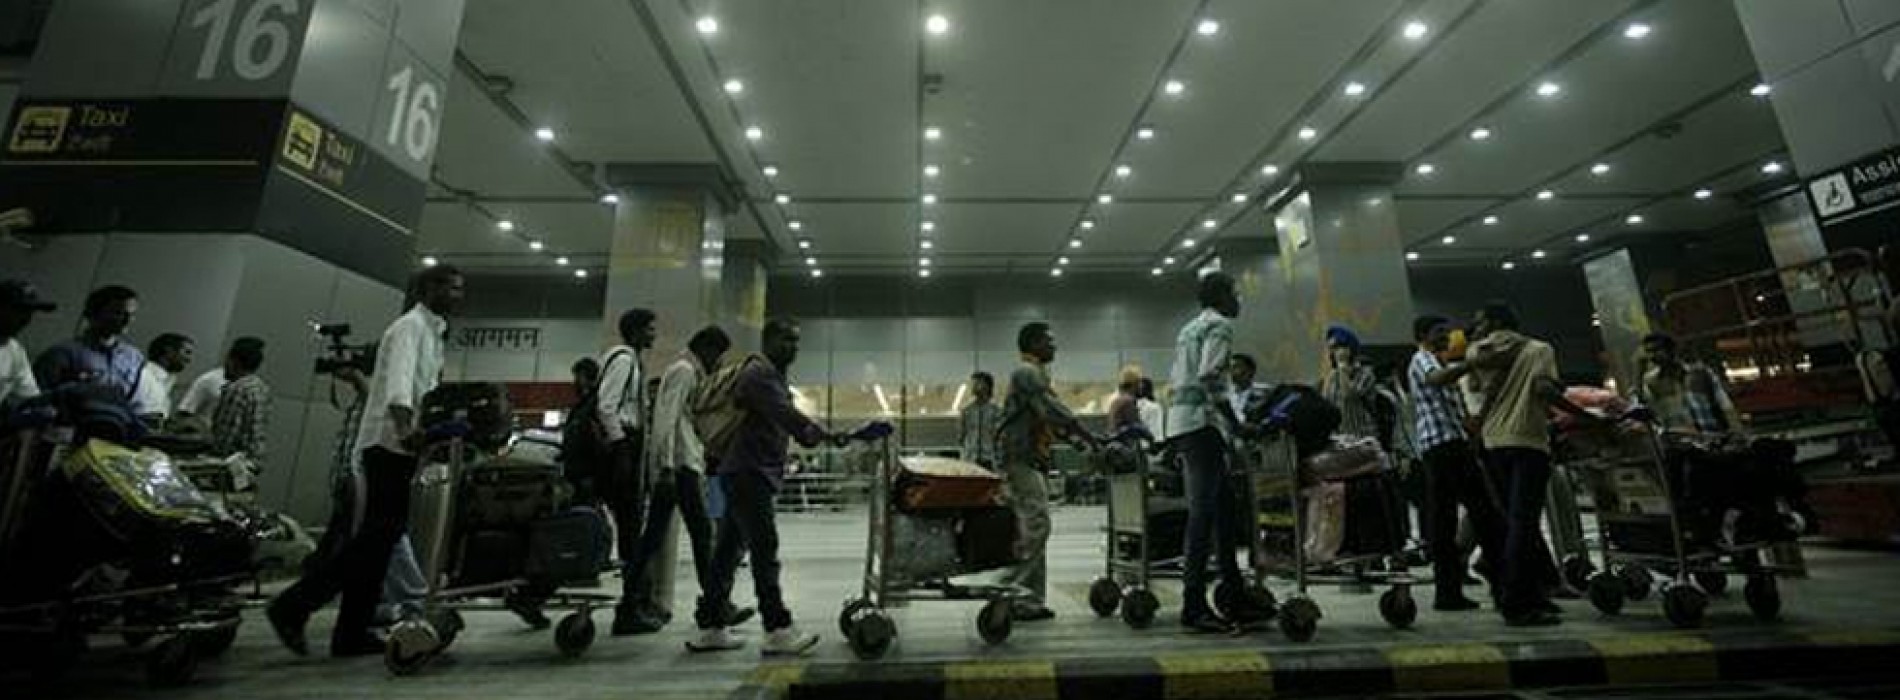 PSF may go up to fill up gap of airports security cost